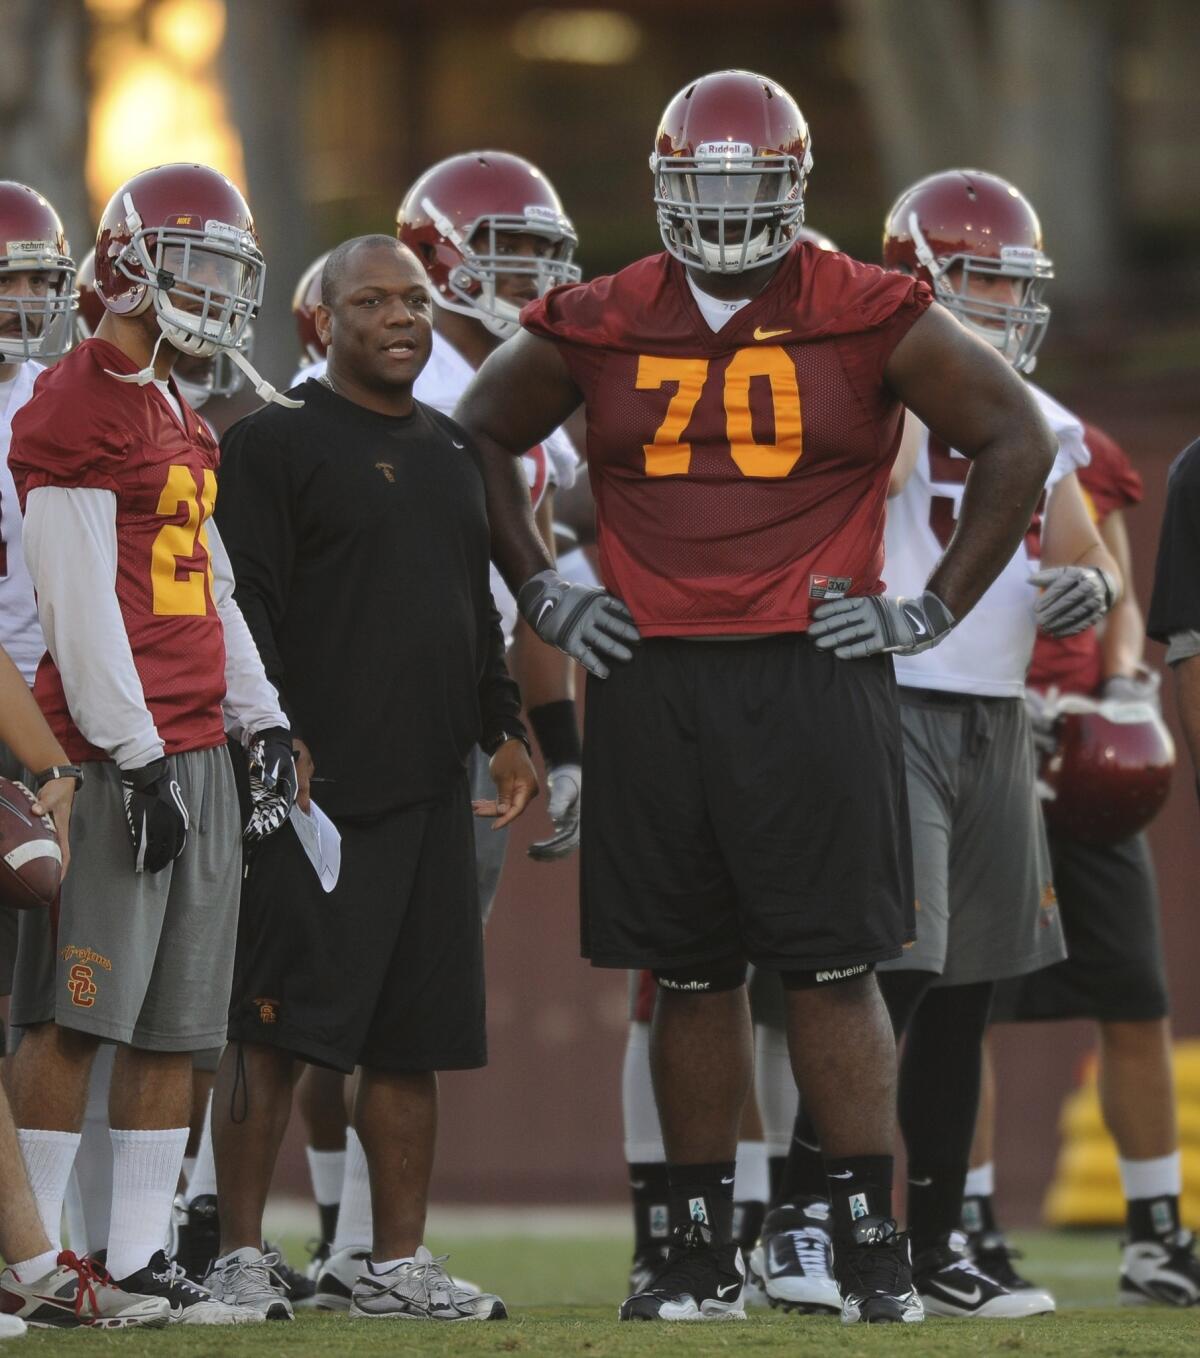 USC offensive lineman Aundrey Walker (70) is expected to play at multiple positions on the Trojans' line this season.